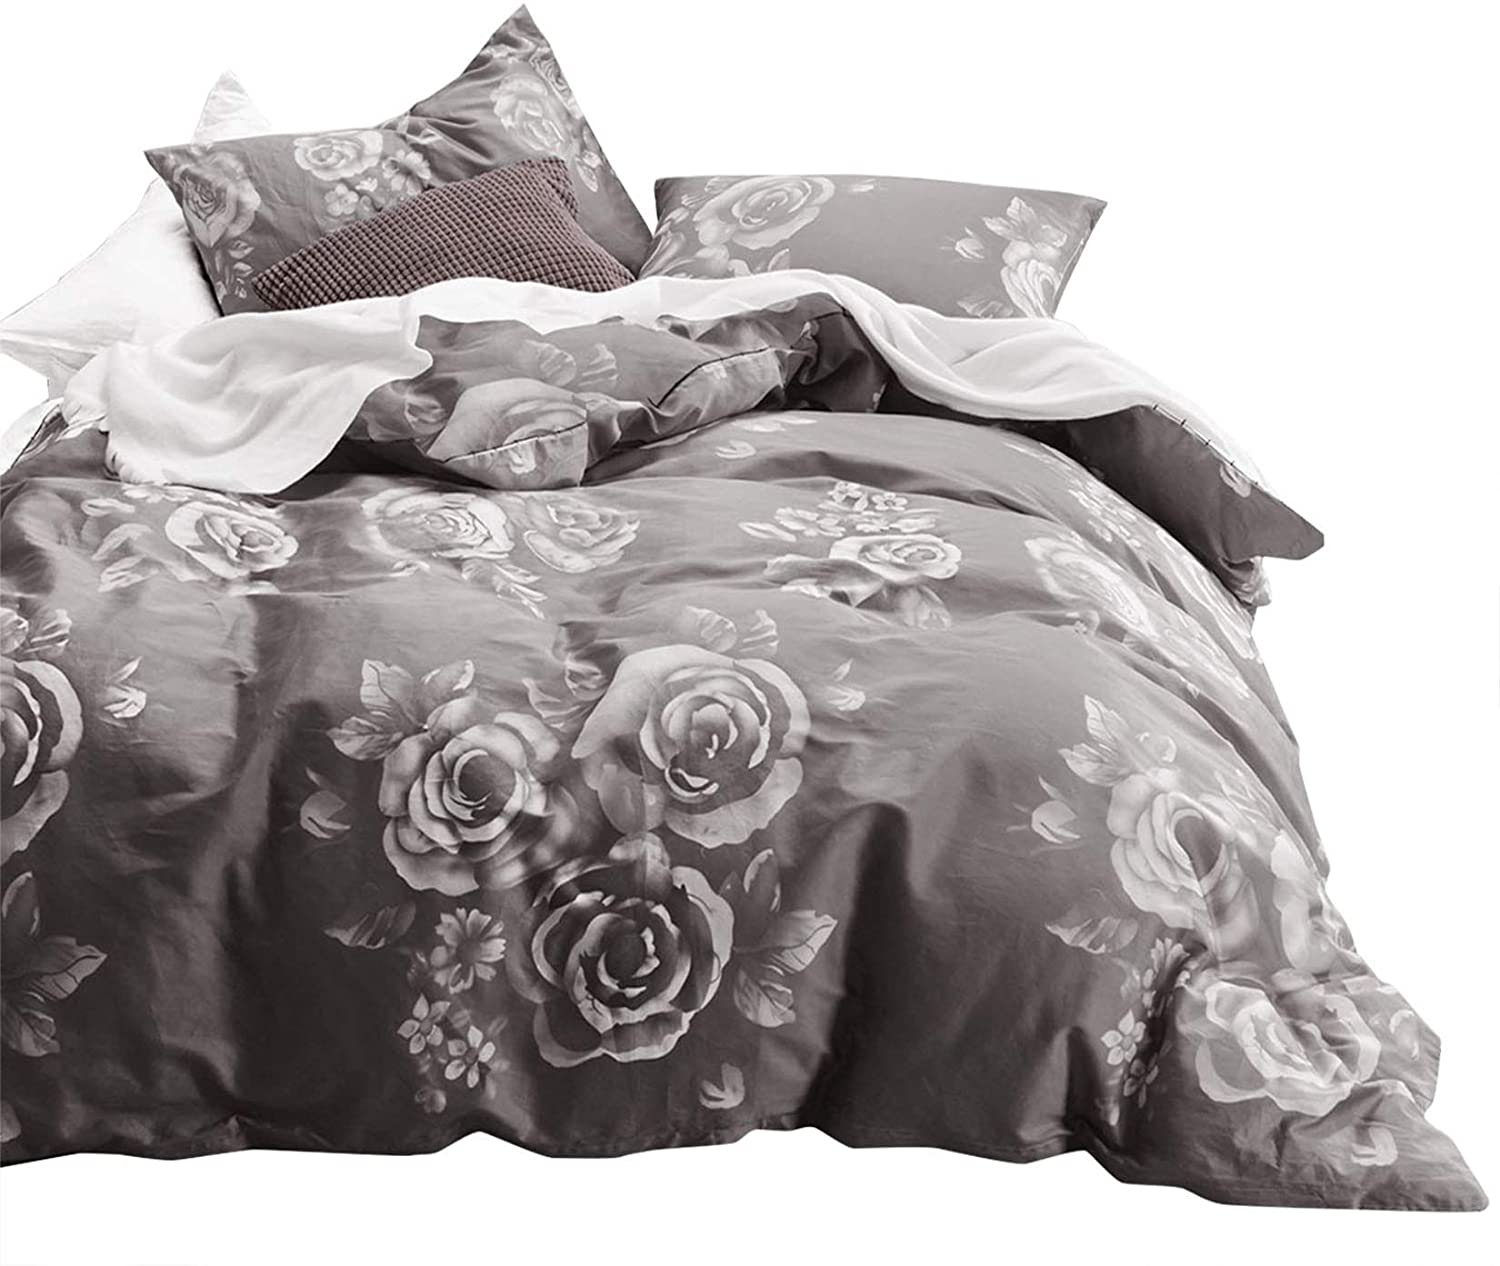 Price:$48.99  In Cloud - Gray Floral Duvet Cover Set, 100% Cotton Bedding, White Rose Flowers Pattern Printed on Dark Grey, with Zipper Closure (3pcs, King Size) : Home & Kitchen